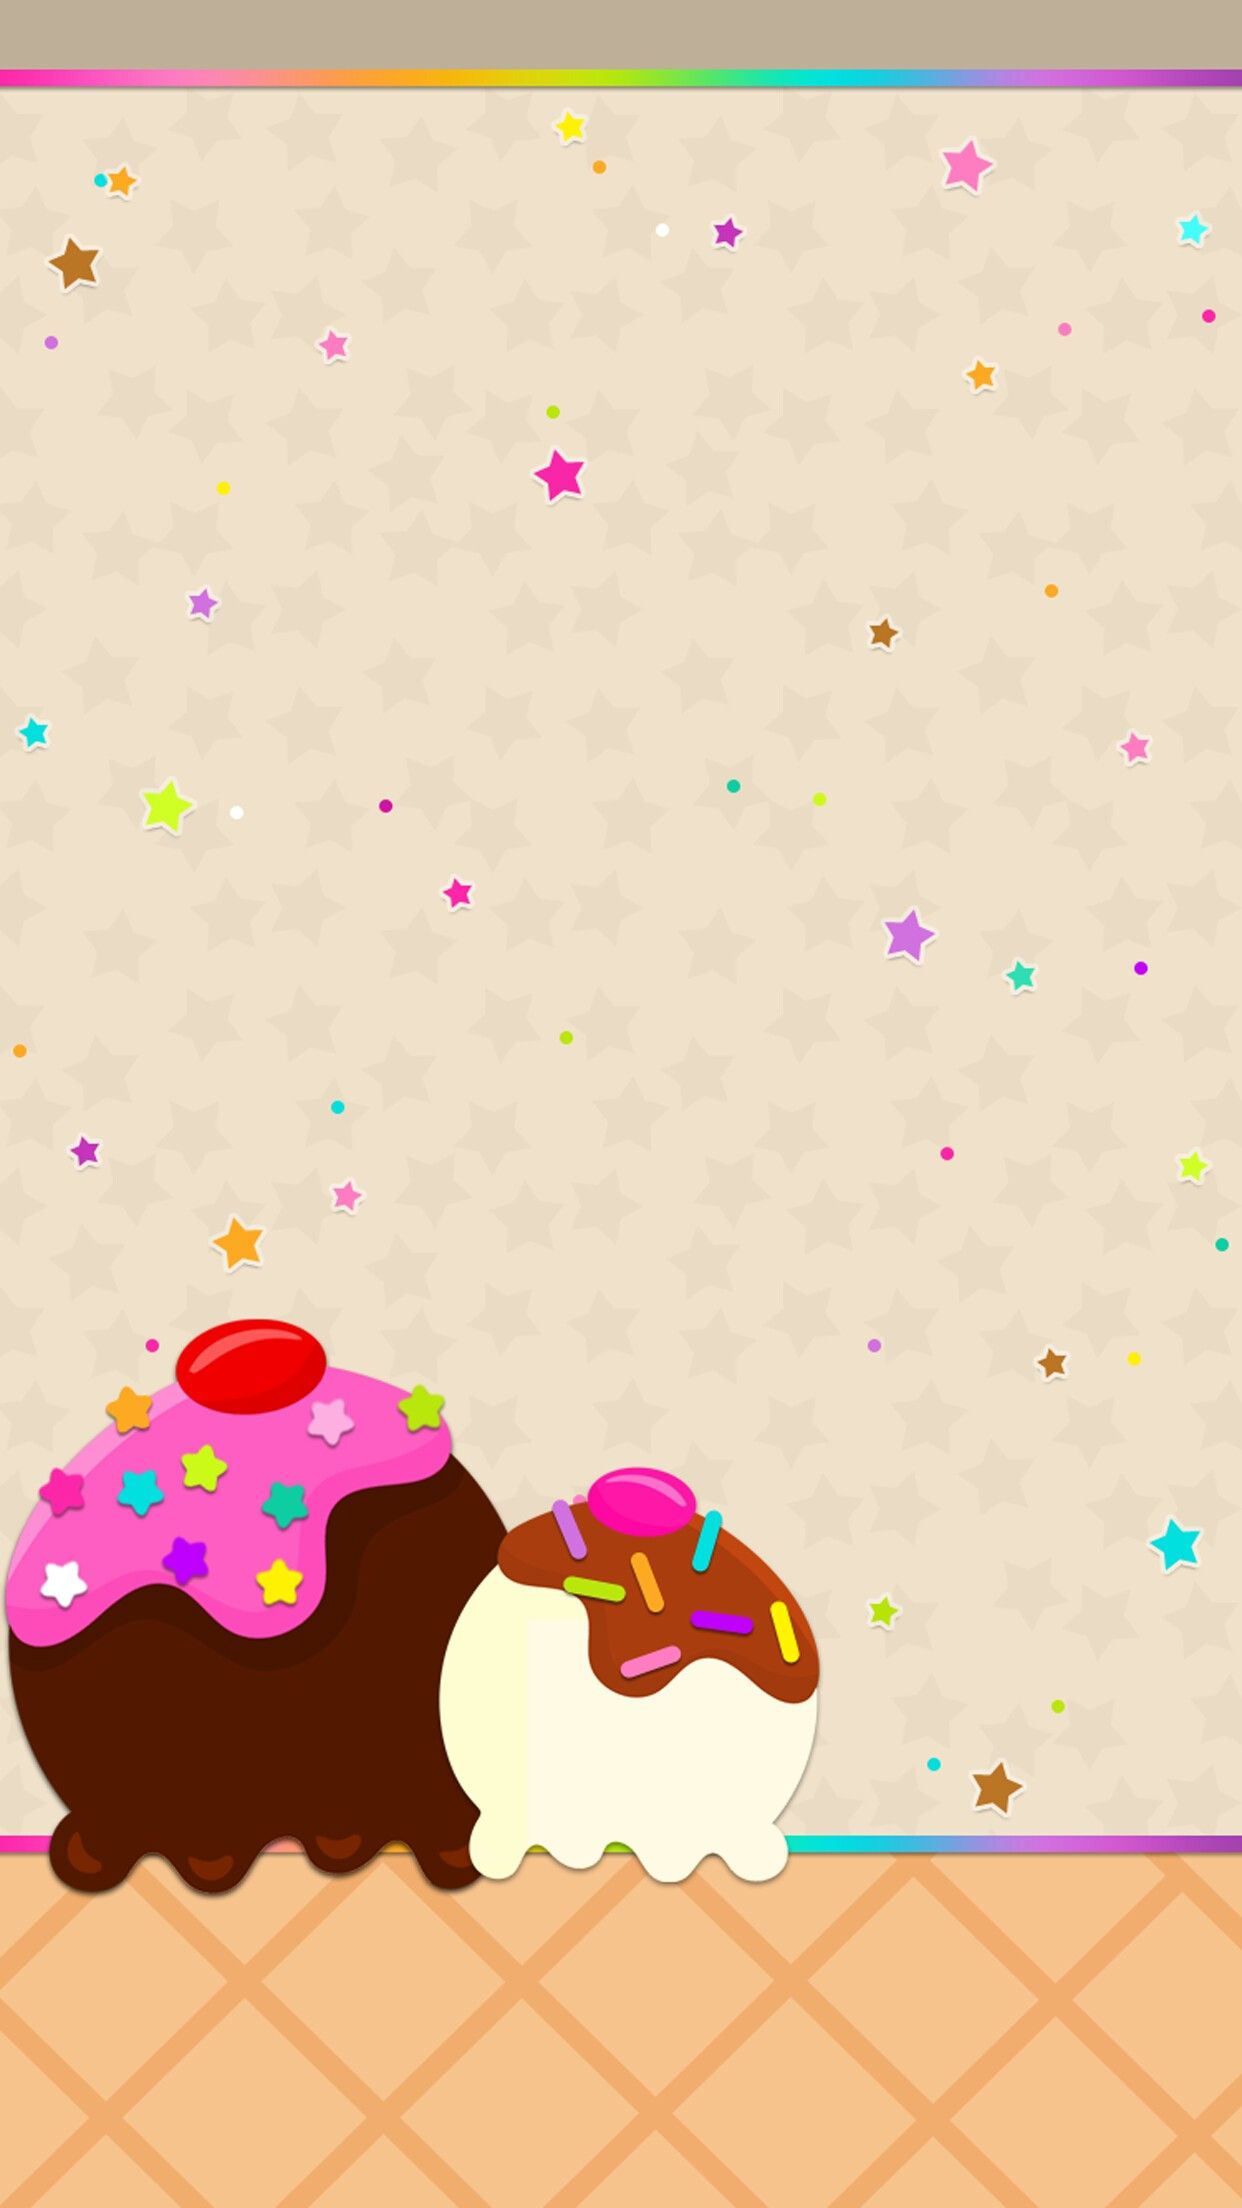 Wallpaper Doces - Yummie Pattern Backgrounds For Iphone , HD Wallpaper & Backgrounds